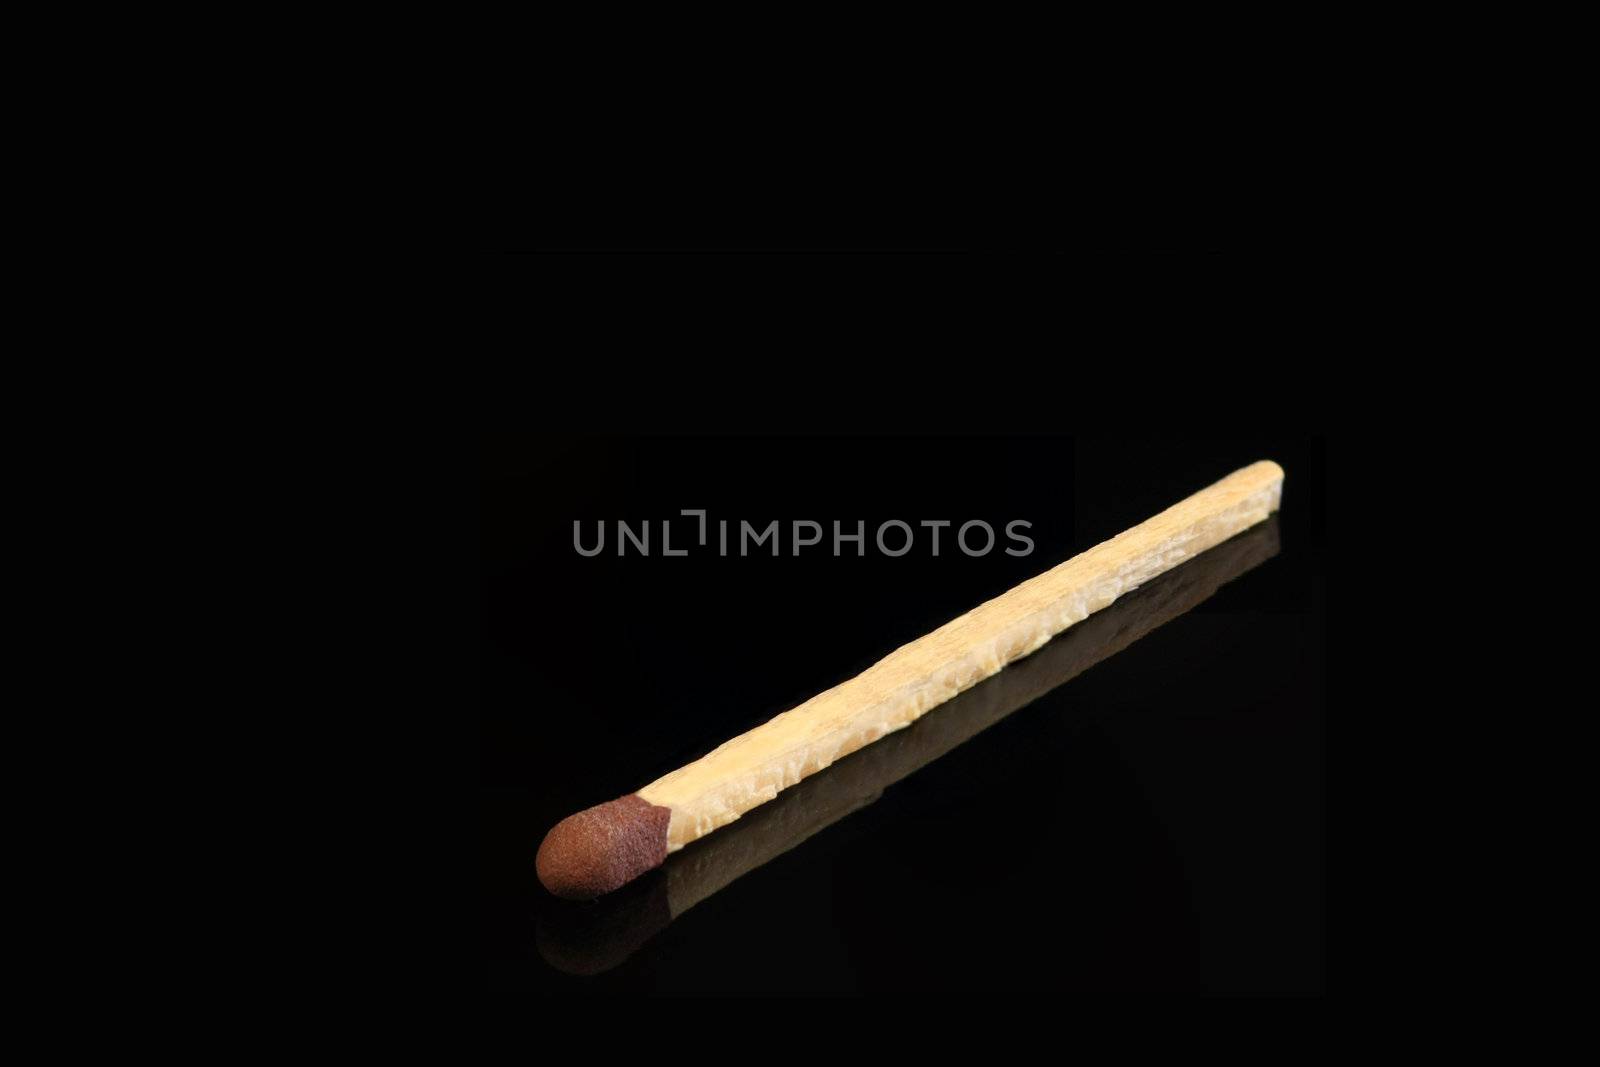 One match stick on black by ChrisAlleaume